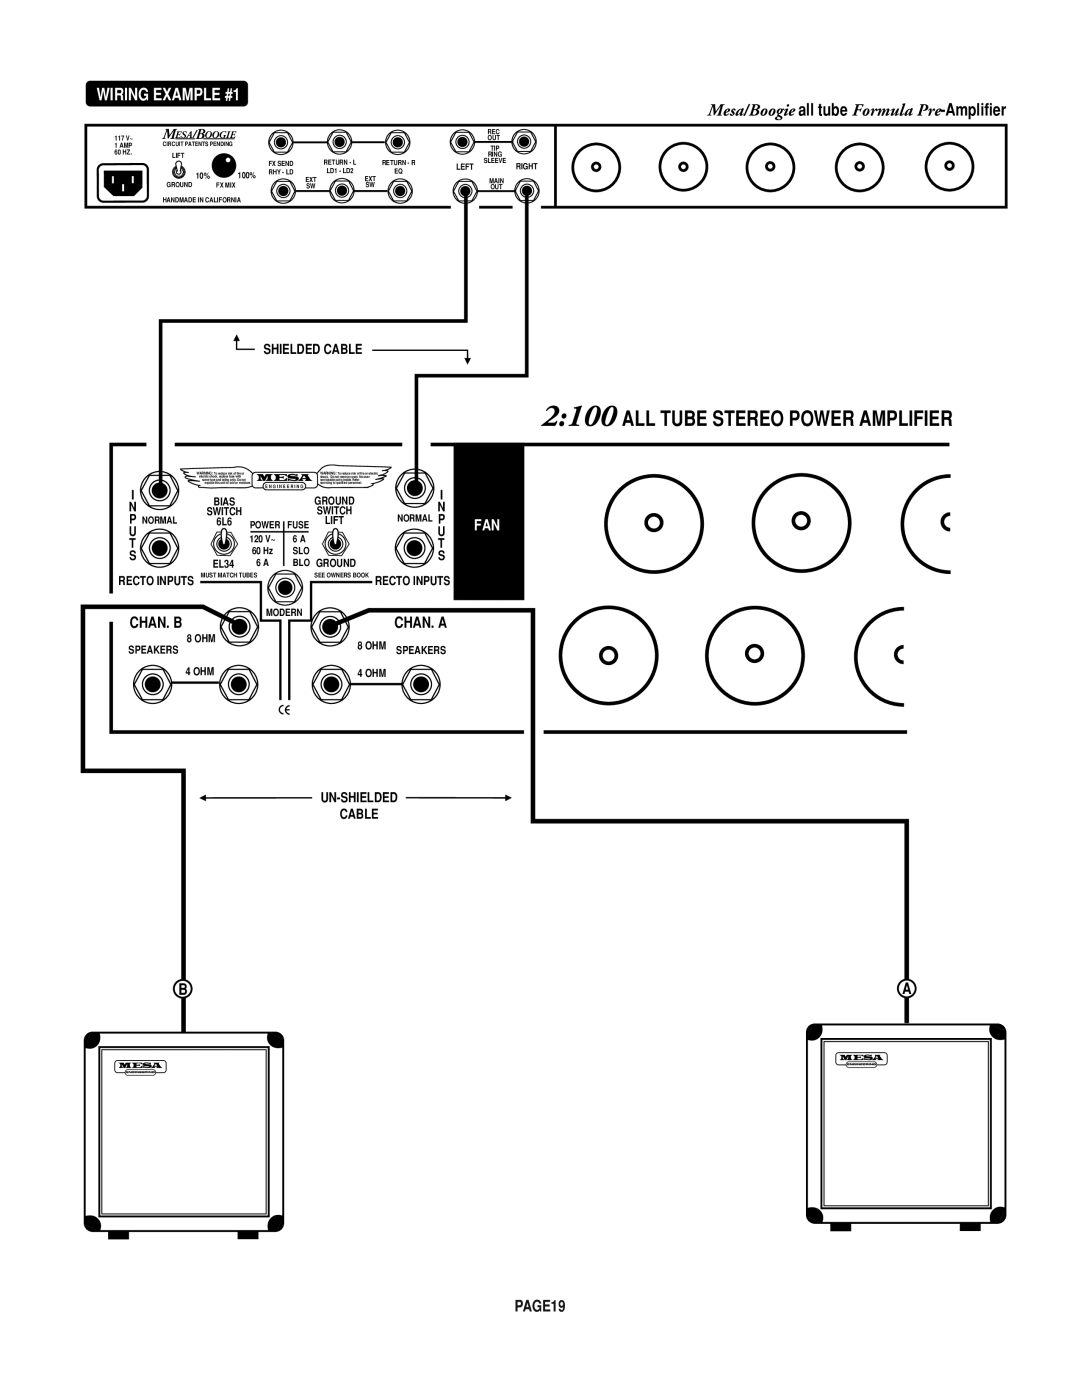 Mesa/Boogie Rectifier Stereo owner manual 2 100 ALL TUBE STEREO POWER AMPLIFIER, WIRING EXAMPLE #1, Un-Shielded Cable 